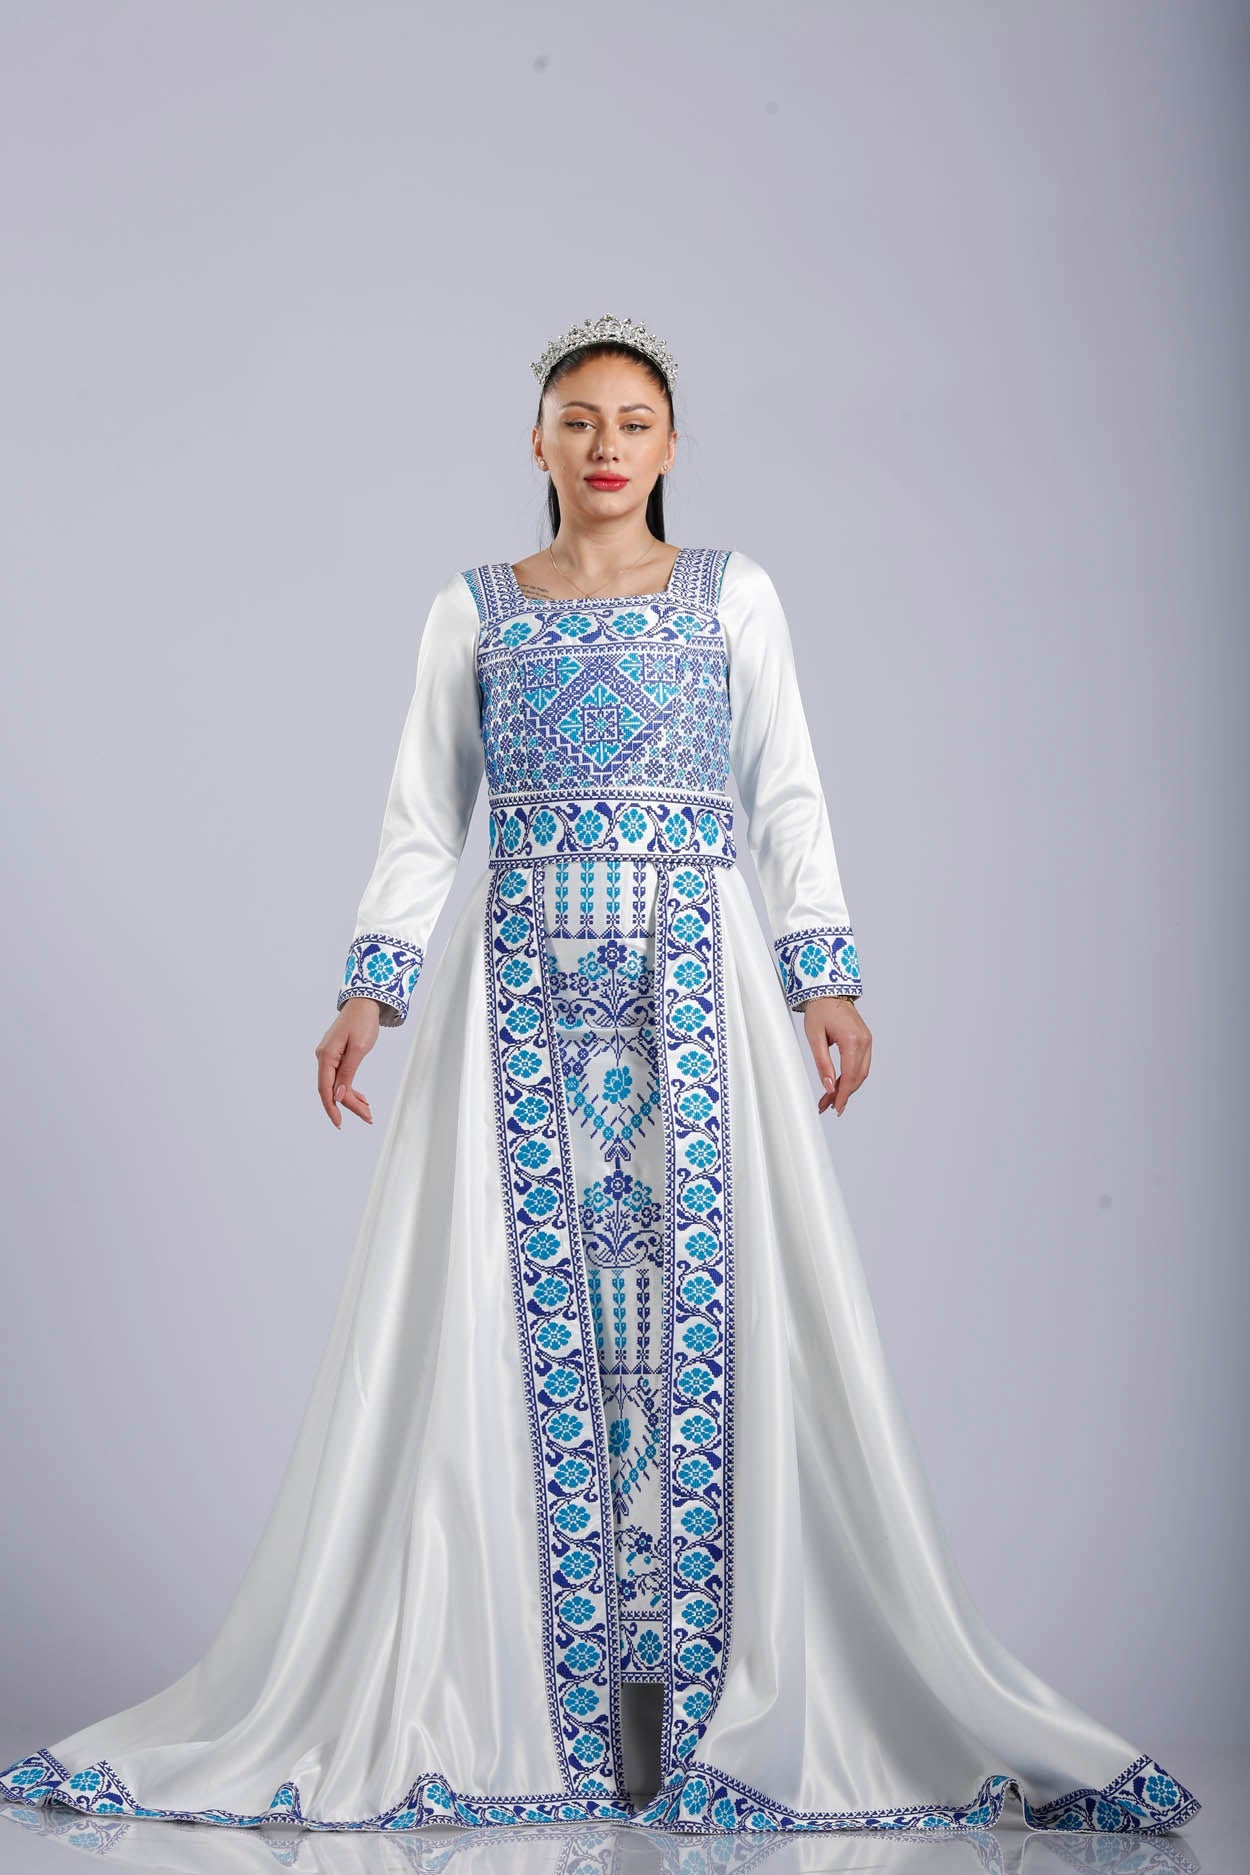 The Princess - Palestinian Inspired Embroidered Dress